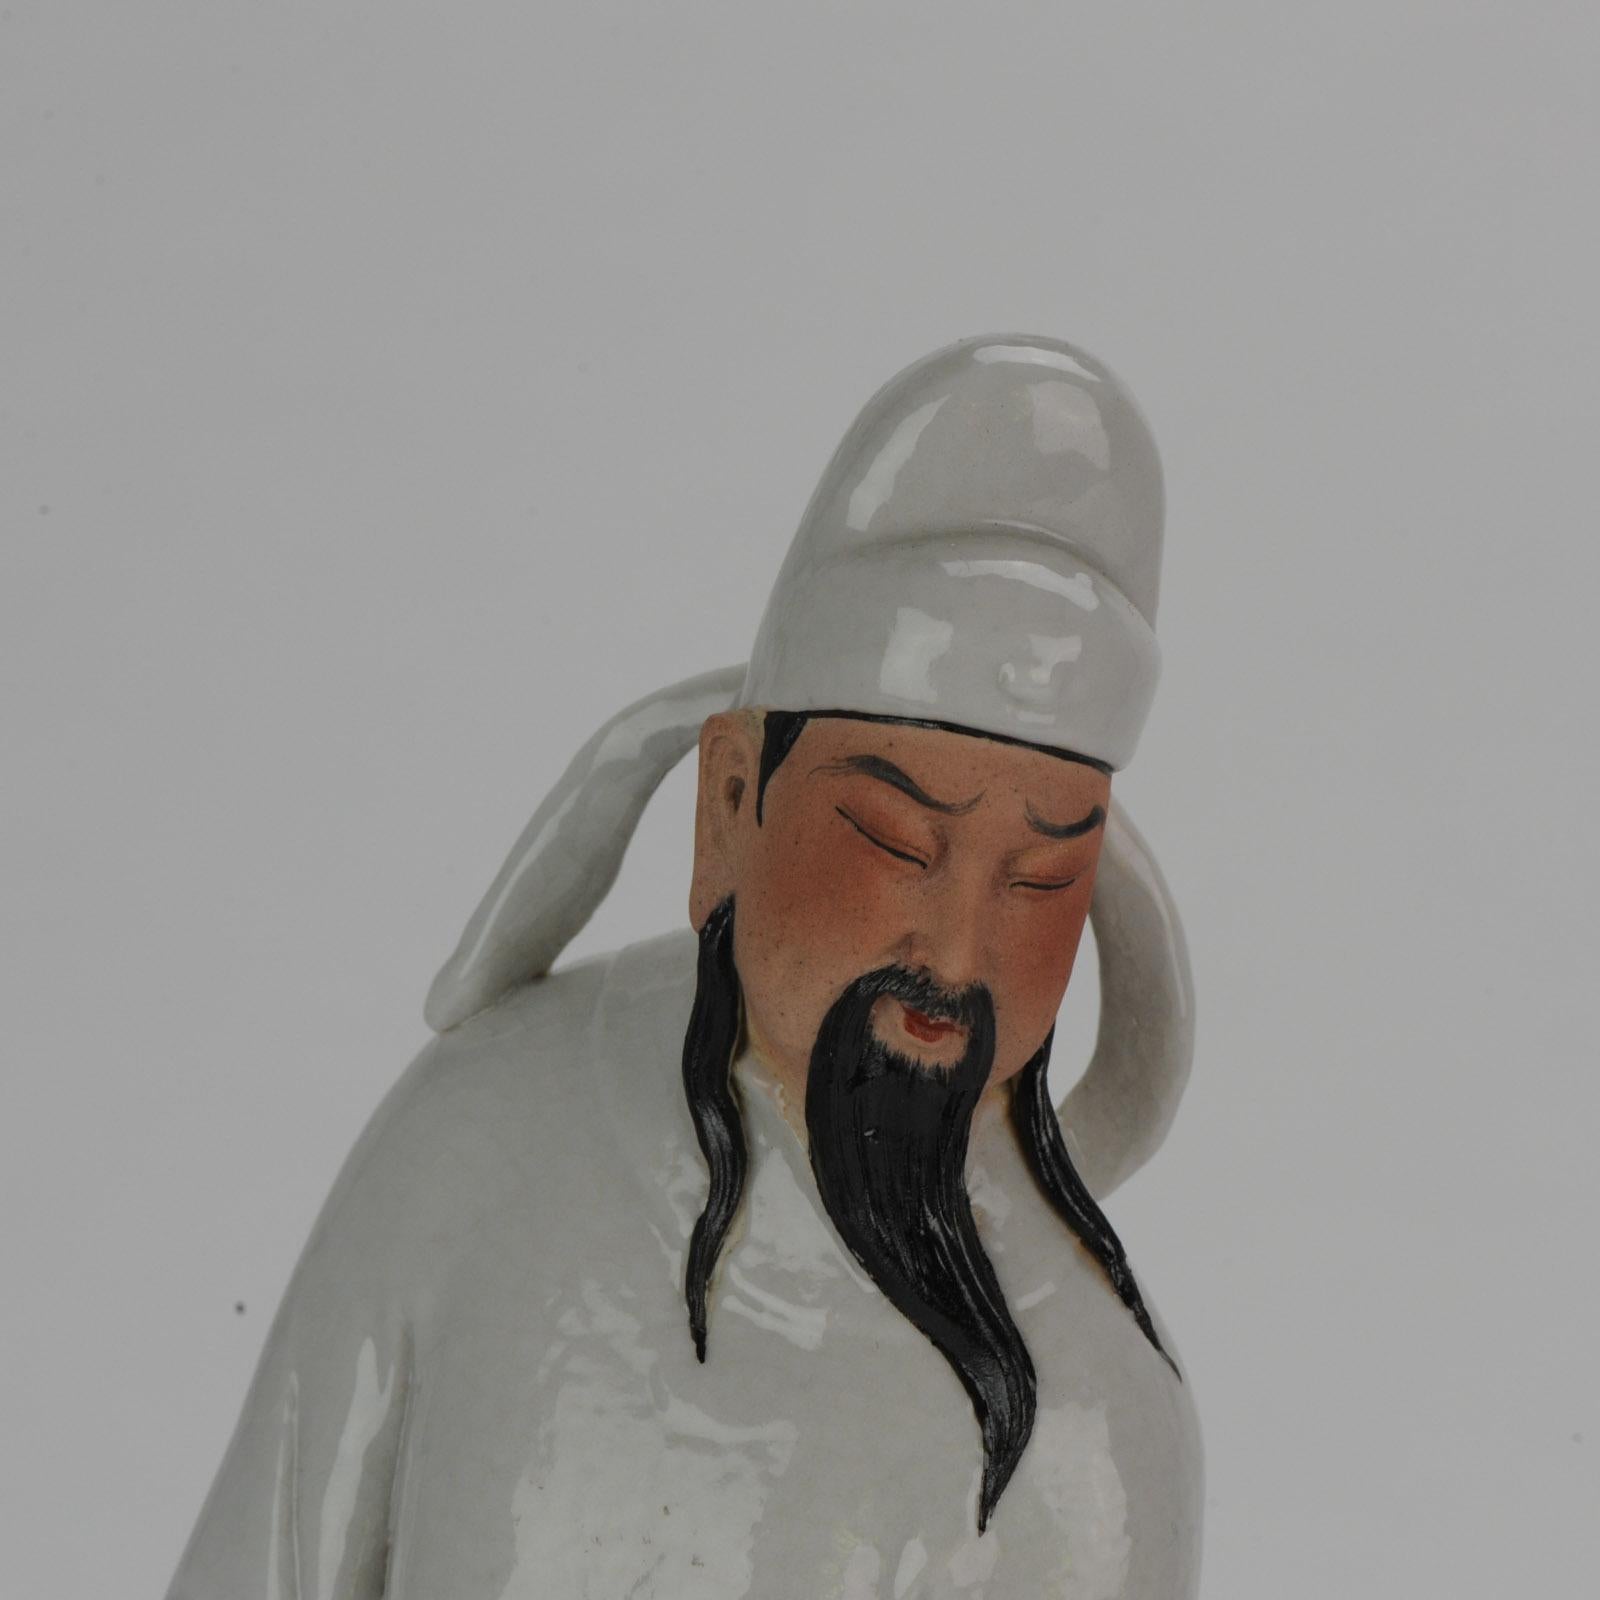 Chinese Porcelain Sculpture Man Holding Ritual Vessel, Dated 1998, Wang Qiang For Sale 6